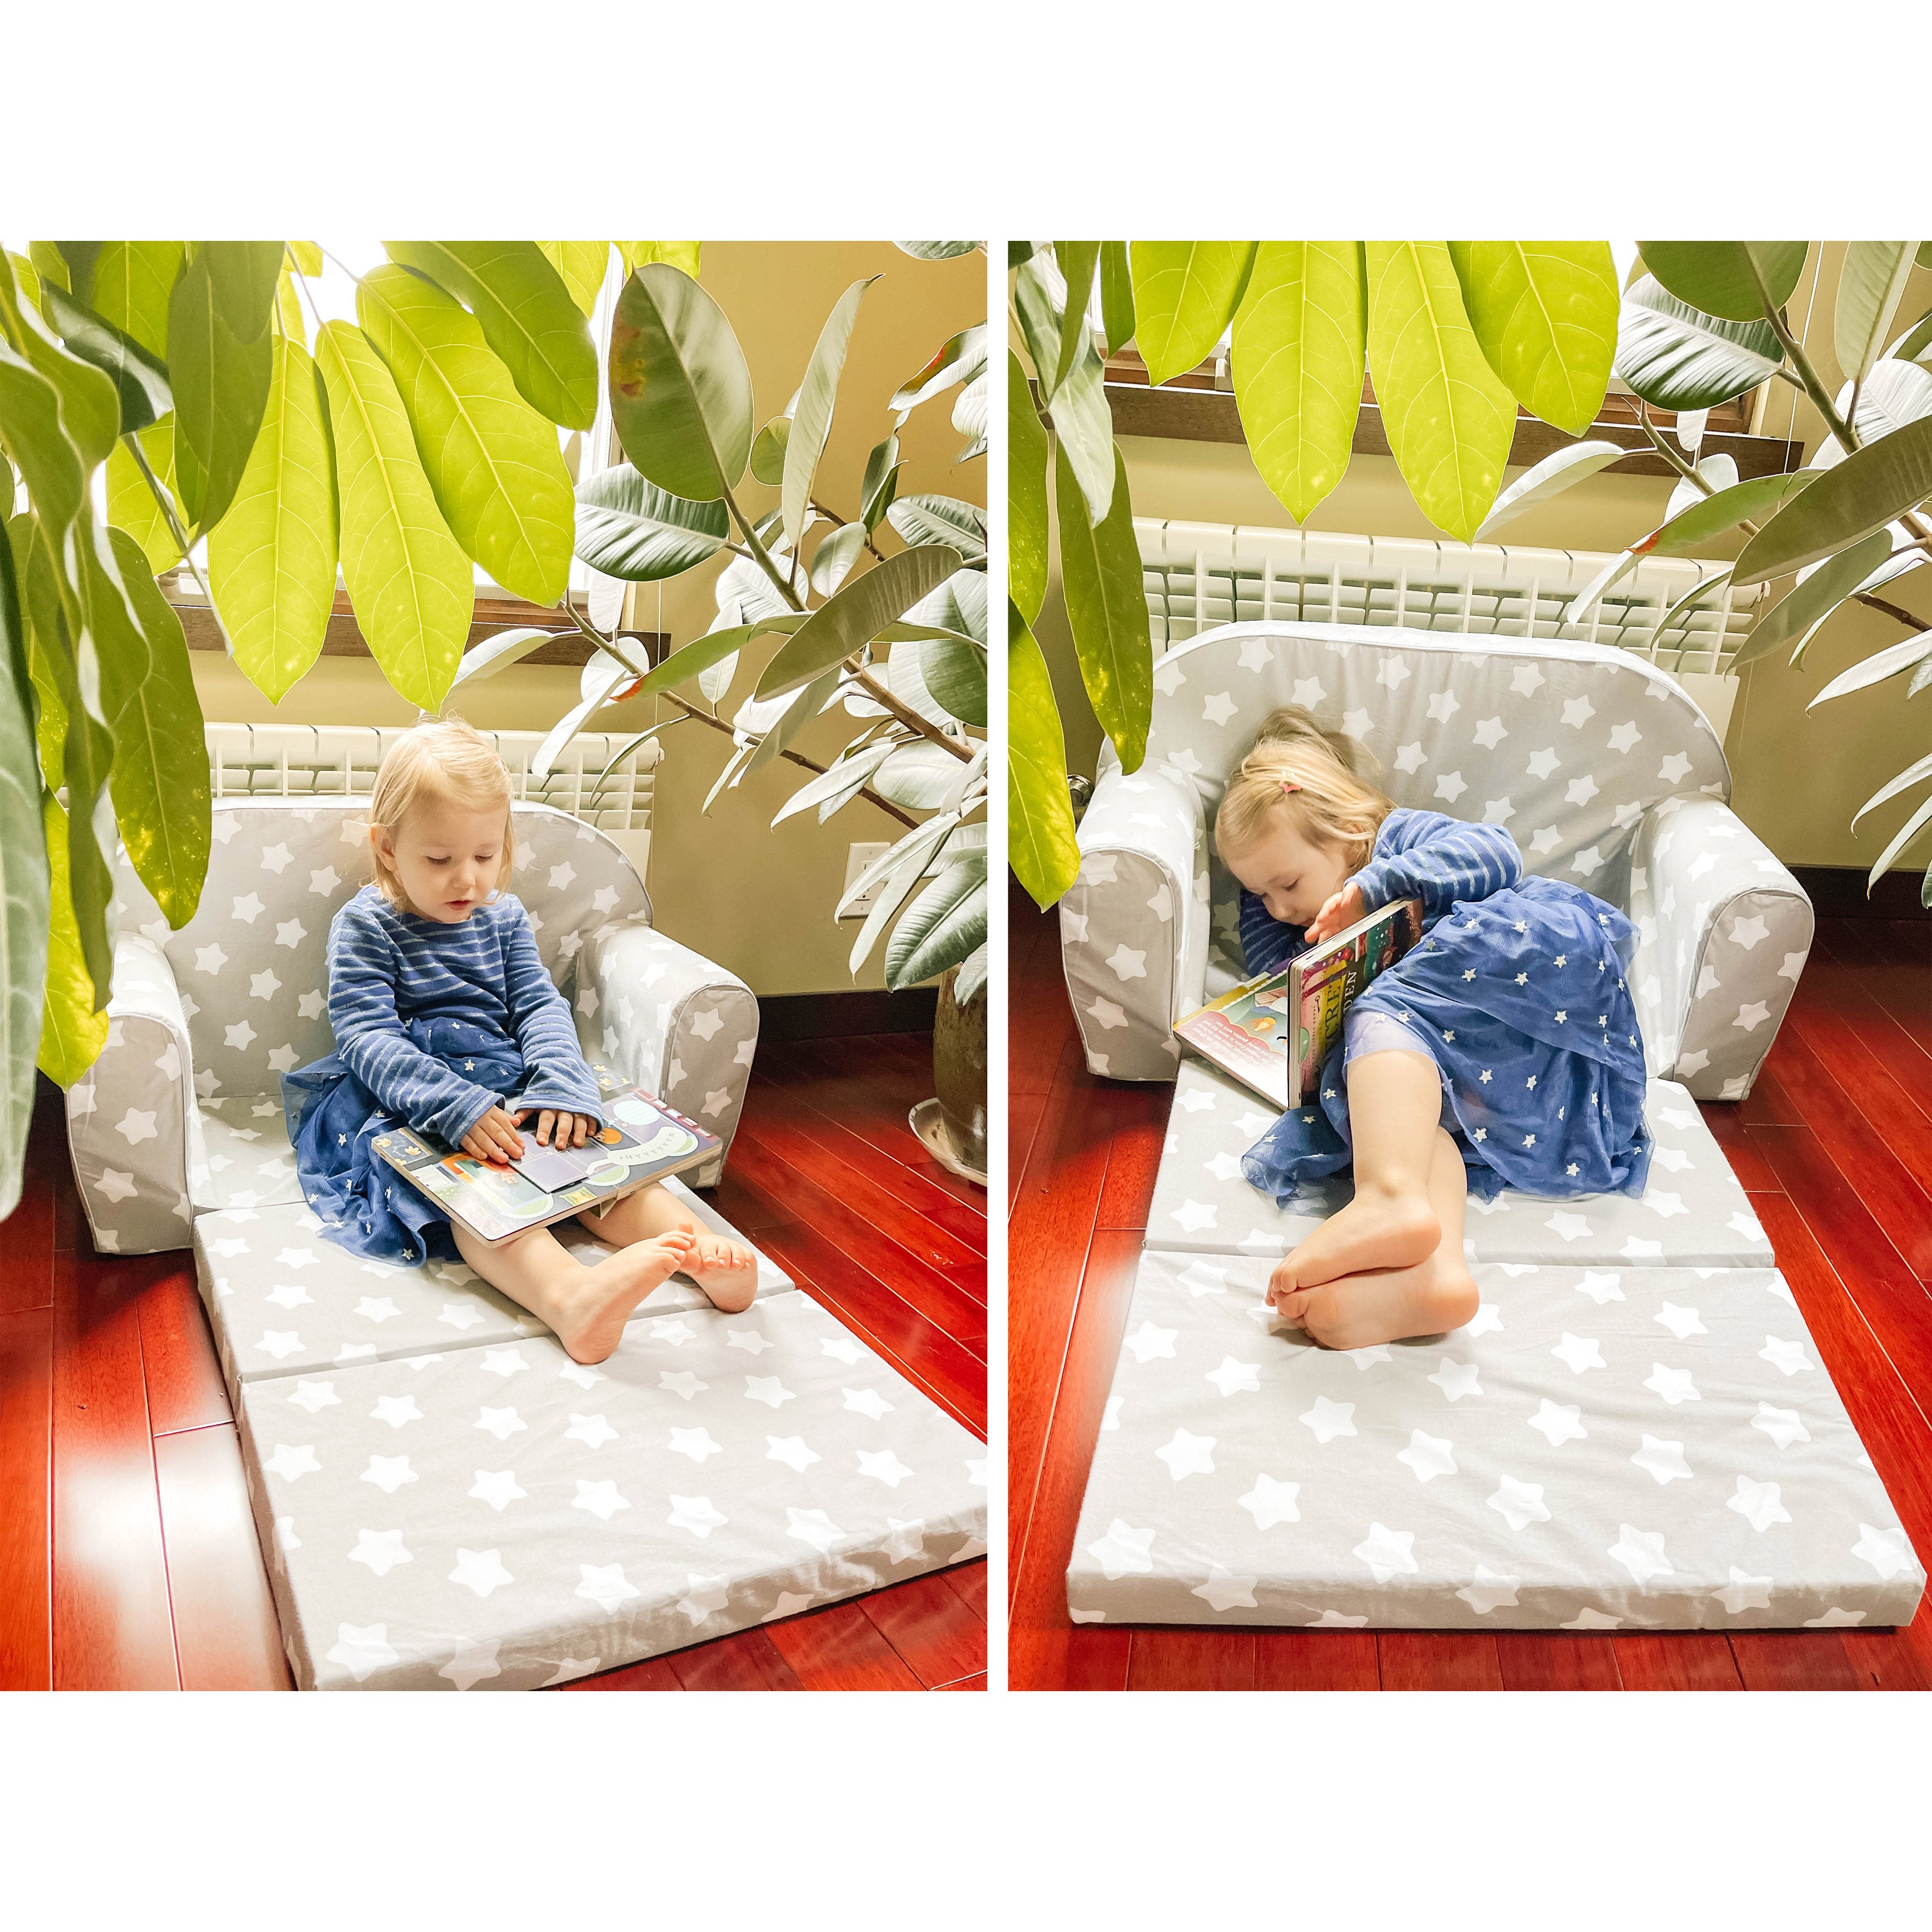 The Flip Kid's Couch  The Fun Configurable Kids Couch – Flip Kids